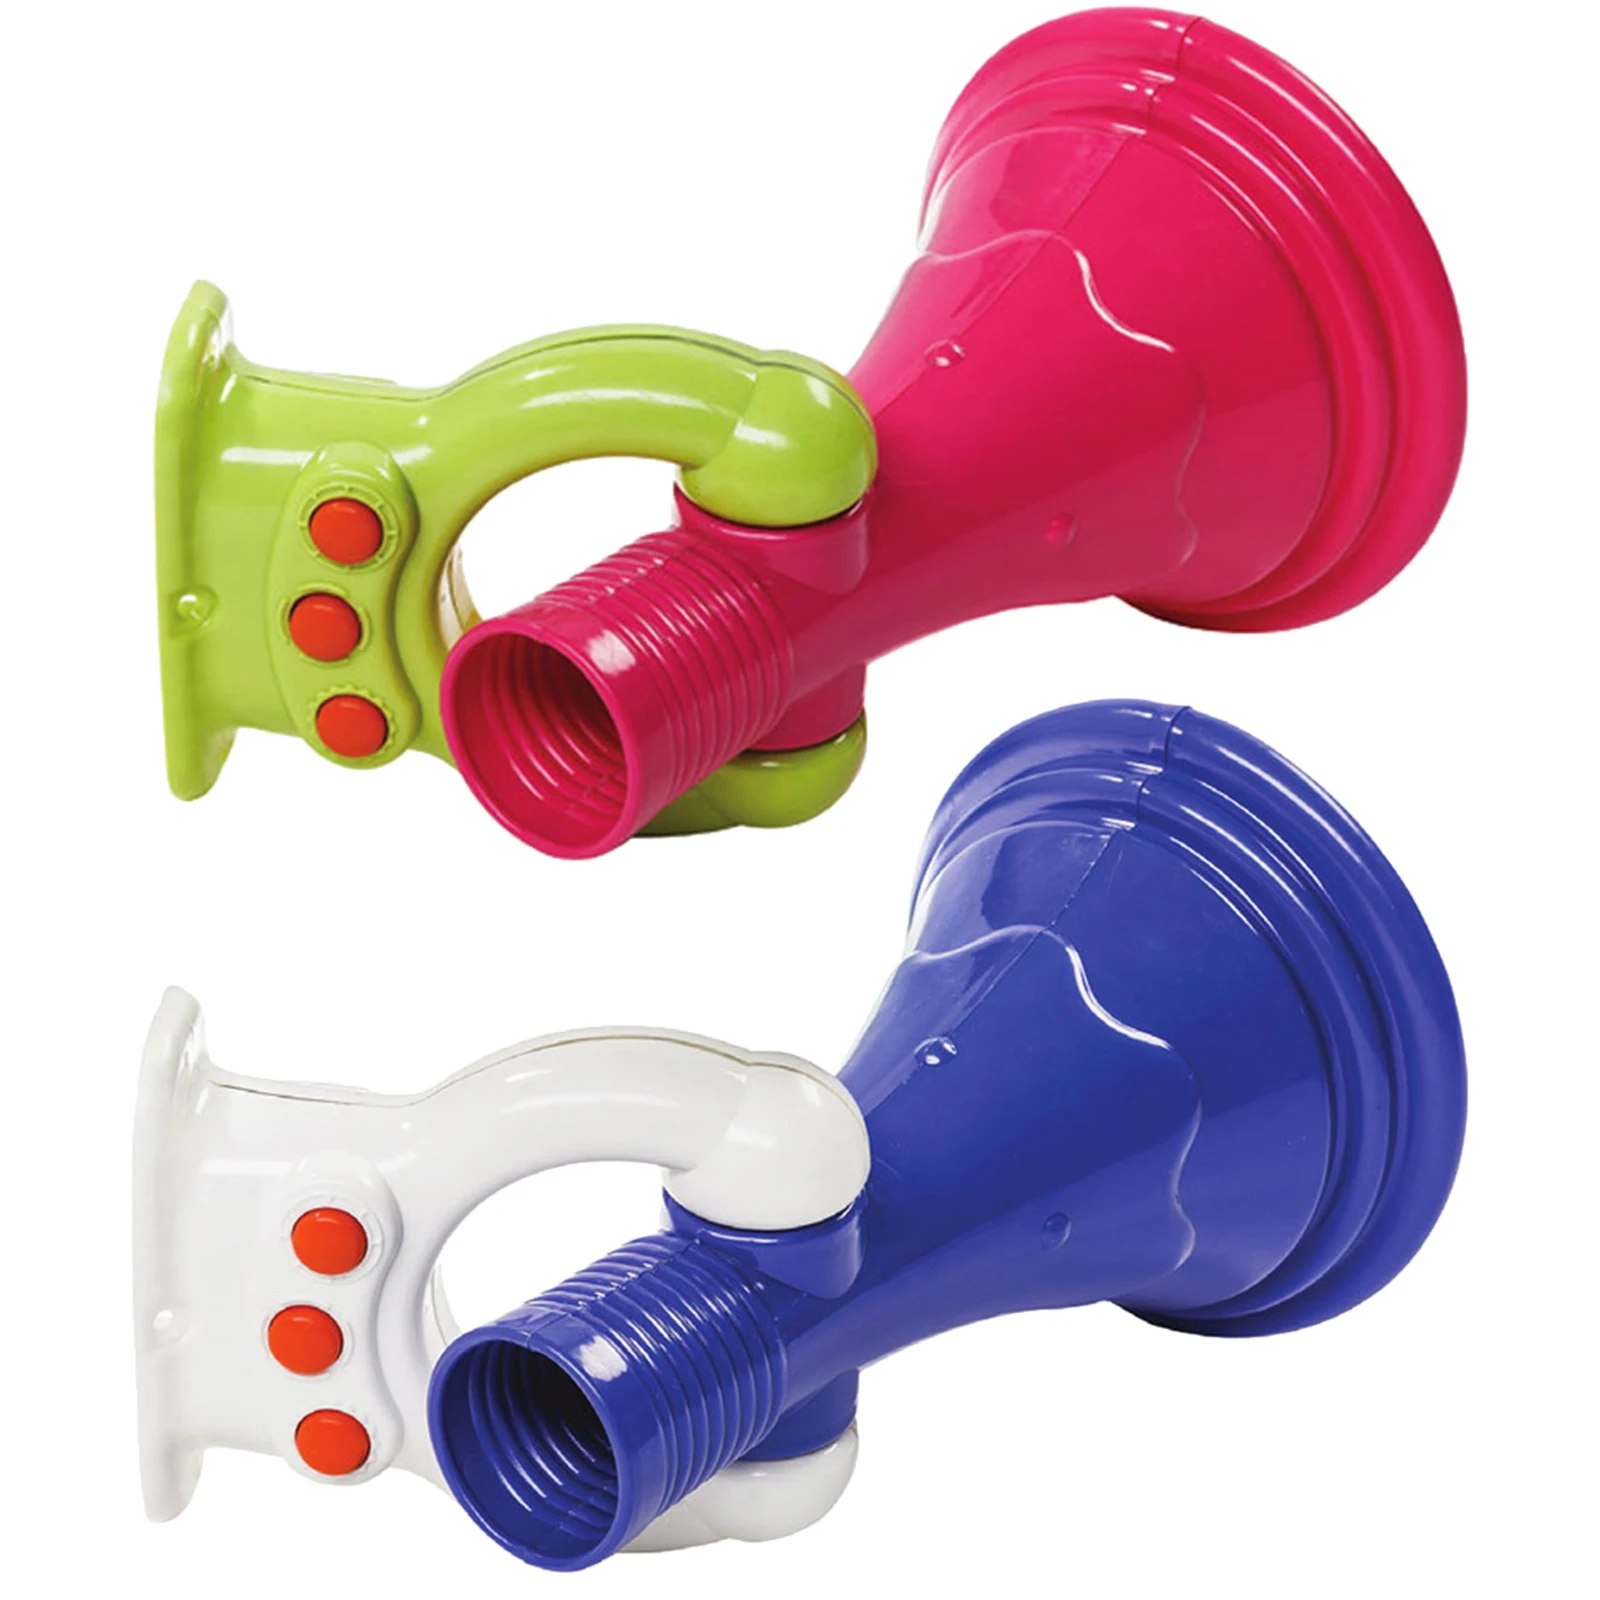 Pretend Play Kids Toy Megaphone Role Play Mounting Amusement Equipment Accessories for Kids